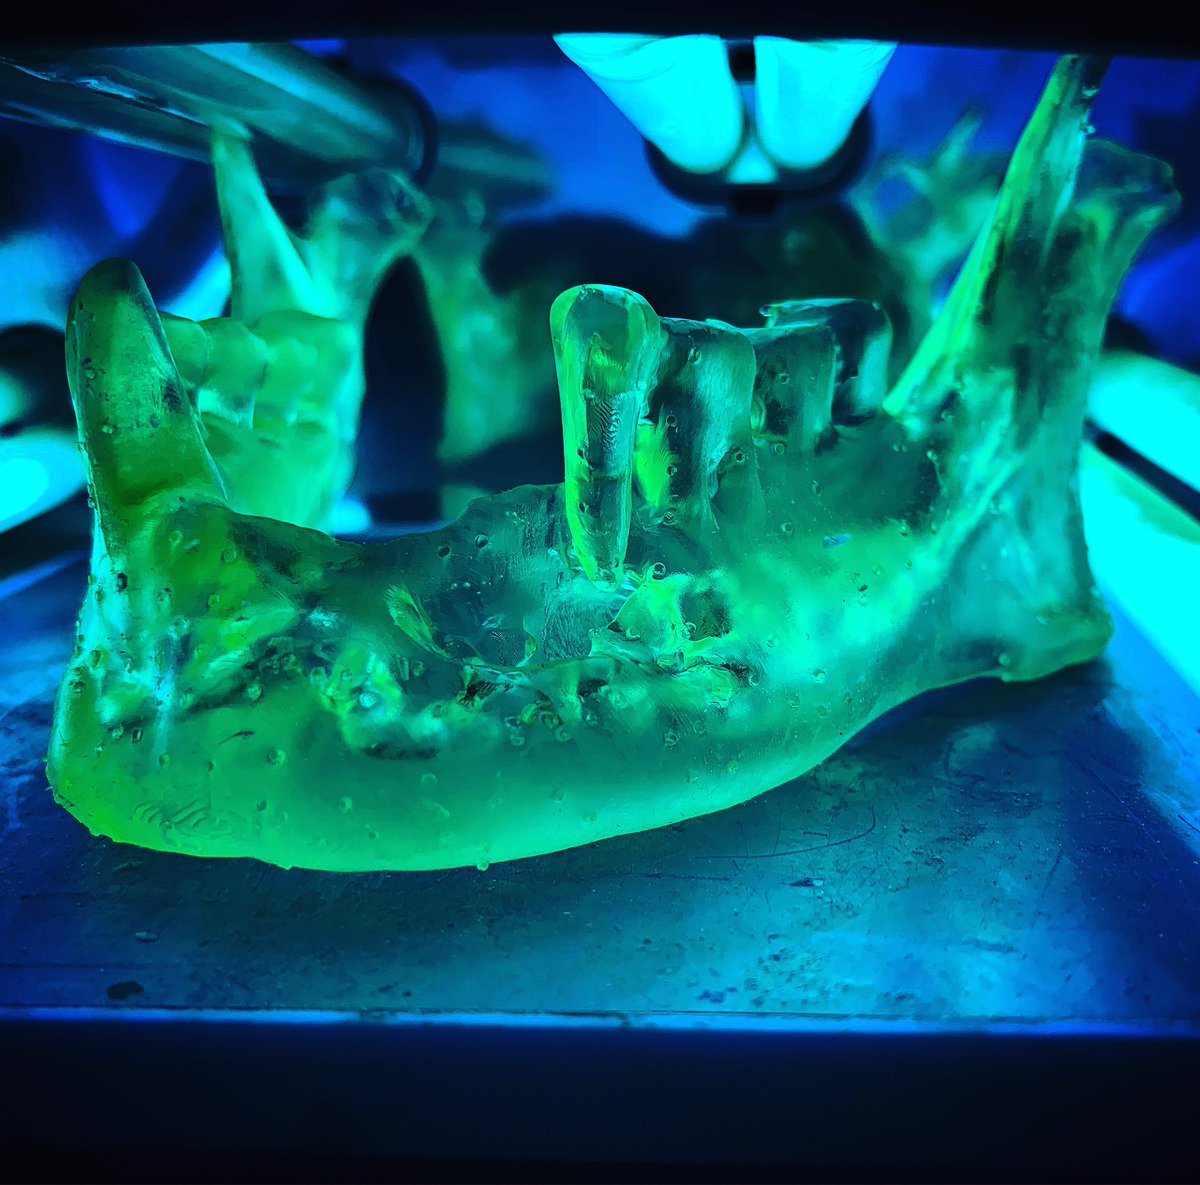 That is what I called beauty.#uvcuring 
Morning case 
3D printed mandible for mandible reconstruction (case courtesy: @drshaktideora , @apollocbcc )
#maxillofacialradiologi #3dprinted -#3dprintingindustry #3dprintingideas #maxillofacialsurgeon #oncosurgery @3dheals